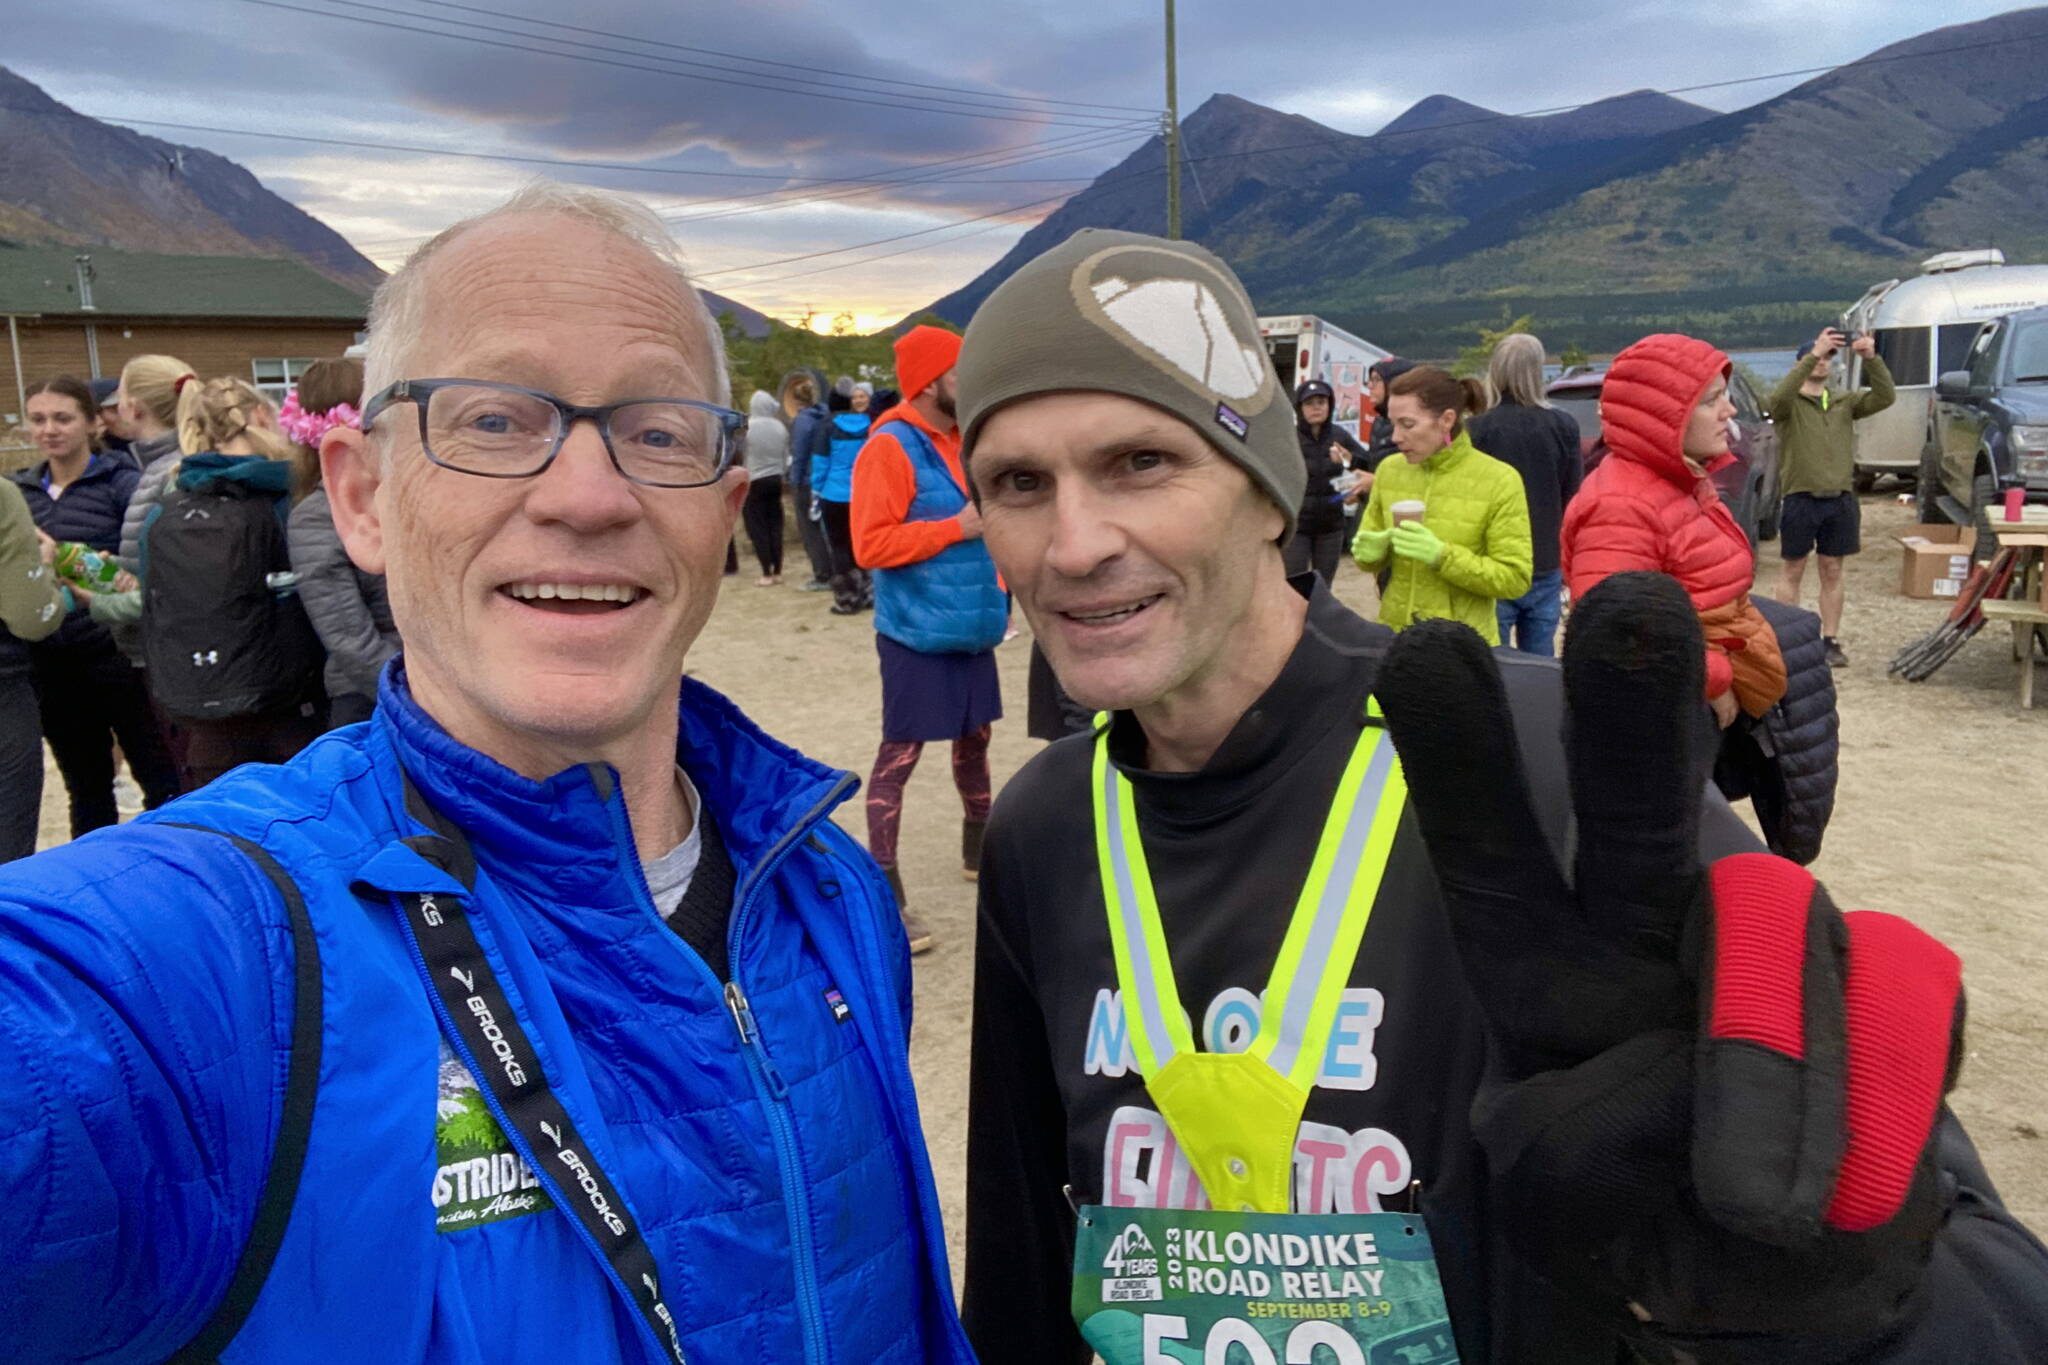 Tom Thompson and Klas Stolpe at the start of the 44-mile solo ultra during the 40th Annual Klondike Road Relay, Saturday, Sept. 9. Stolpe was running as team No One Fights Alone in support of his brother James who is fighting cancer. (Photo by Tom Thompson)